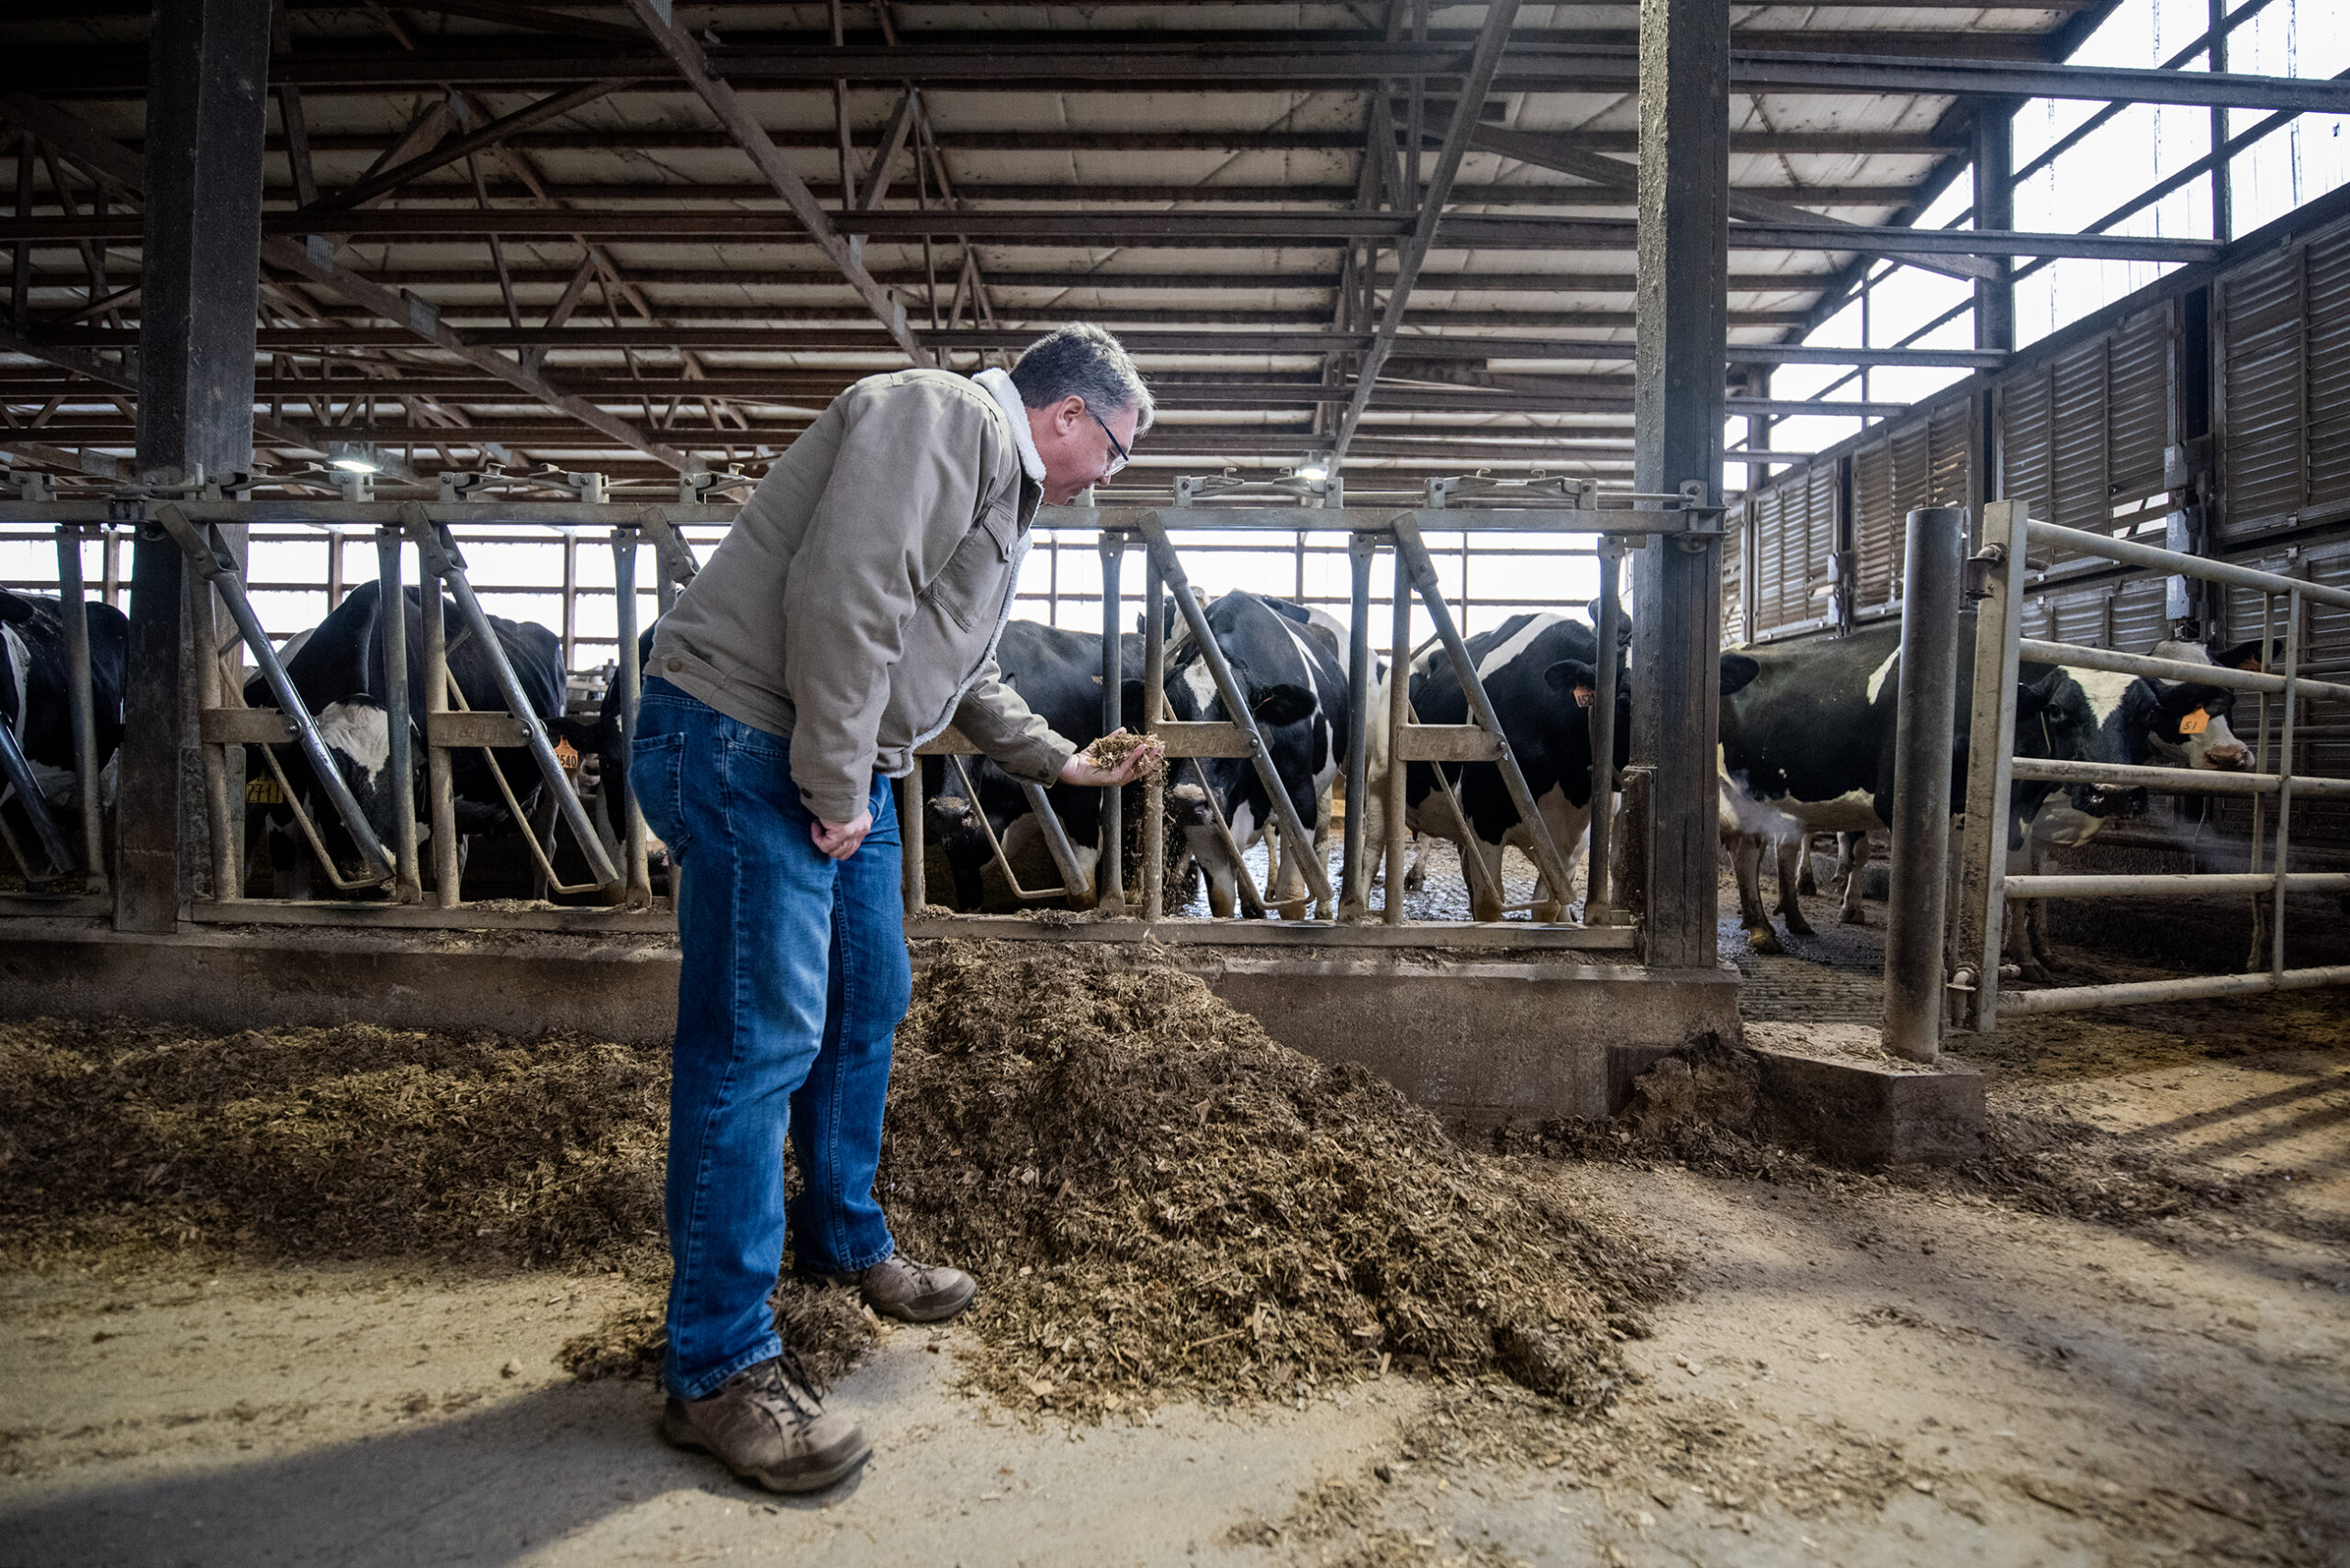 Brad Pfaff looks at cow feed in his hand while standing in a dairy barn.